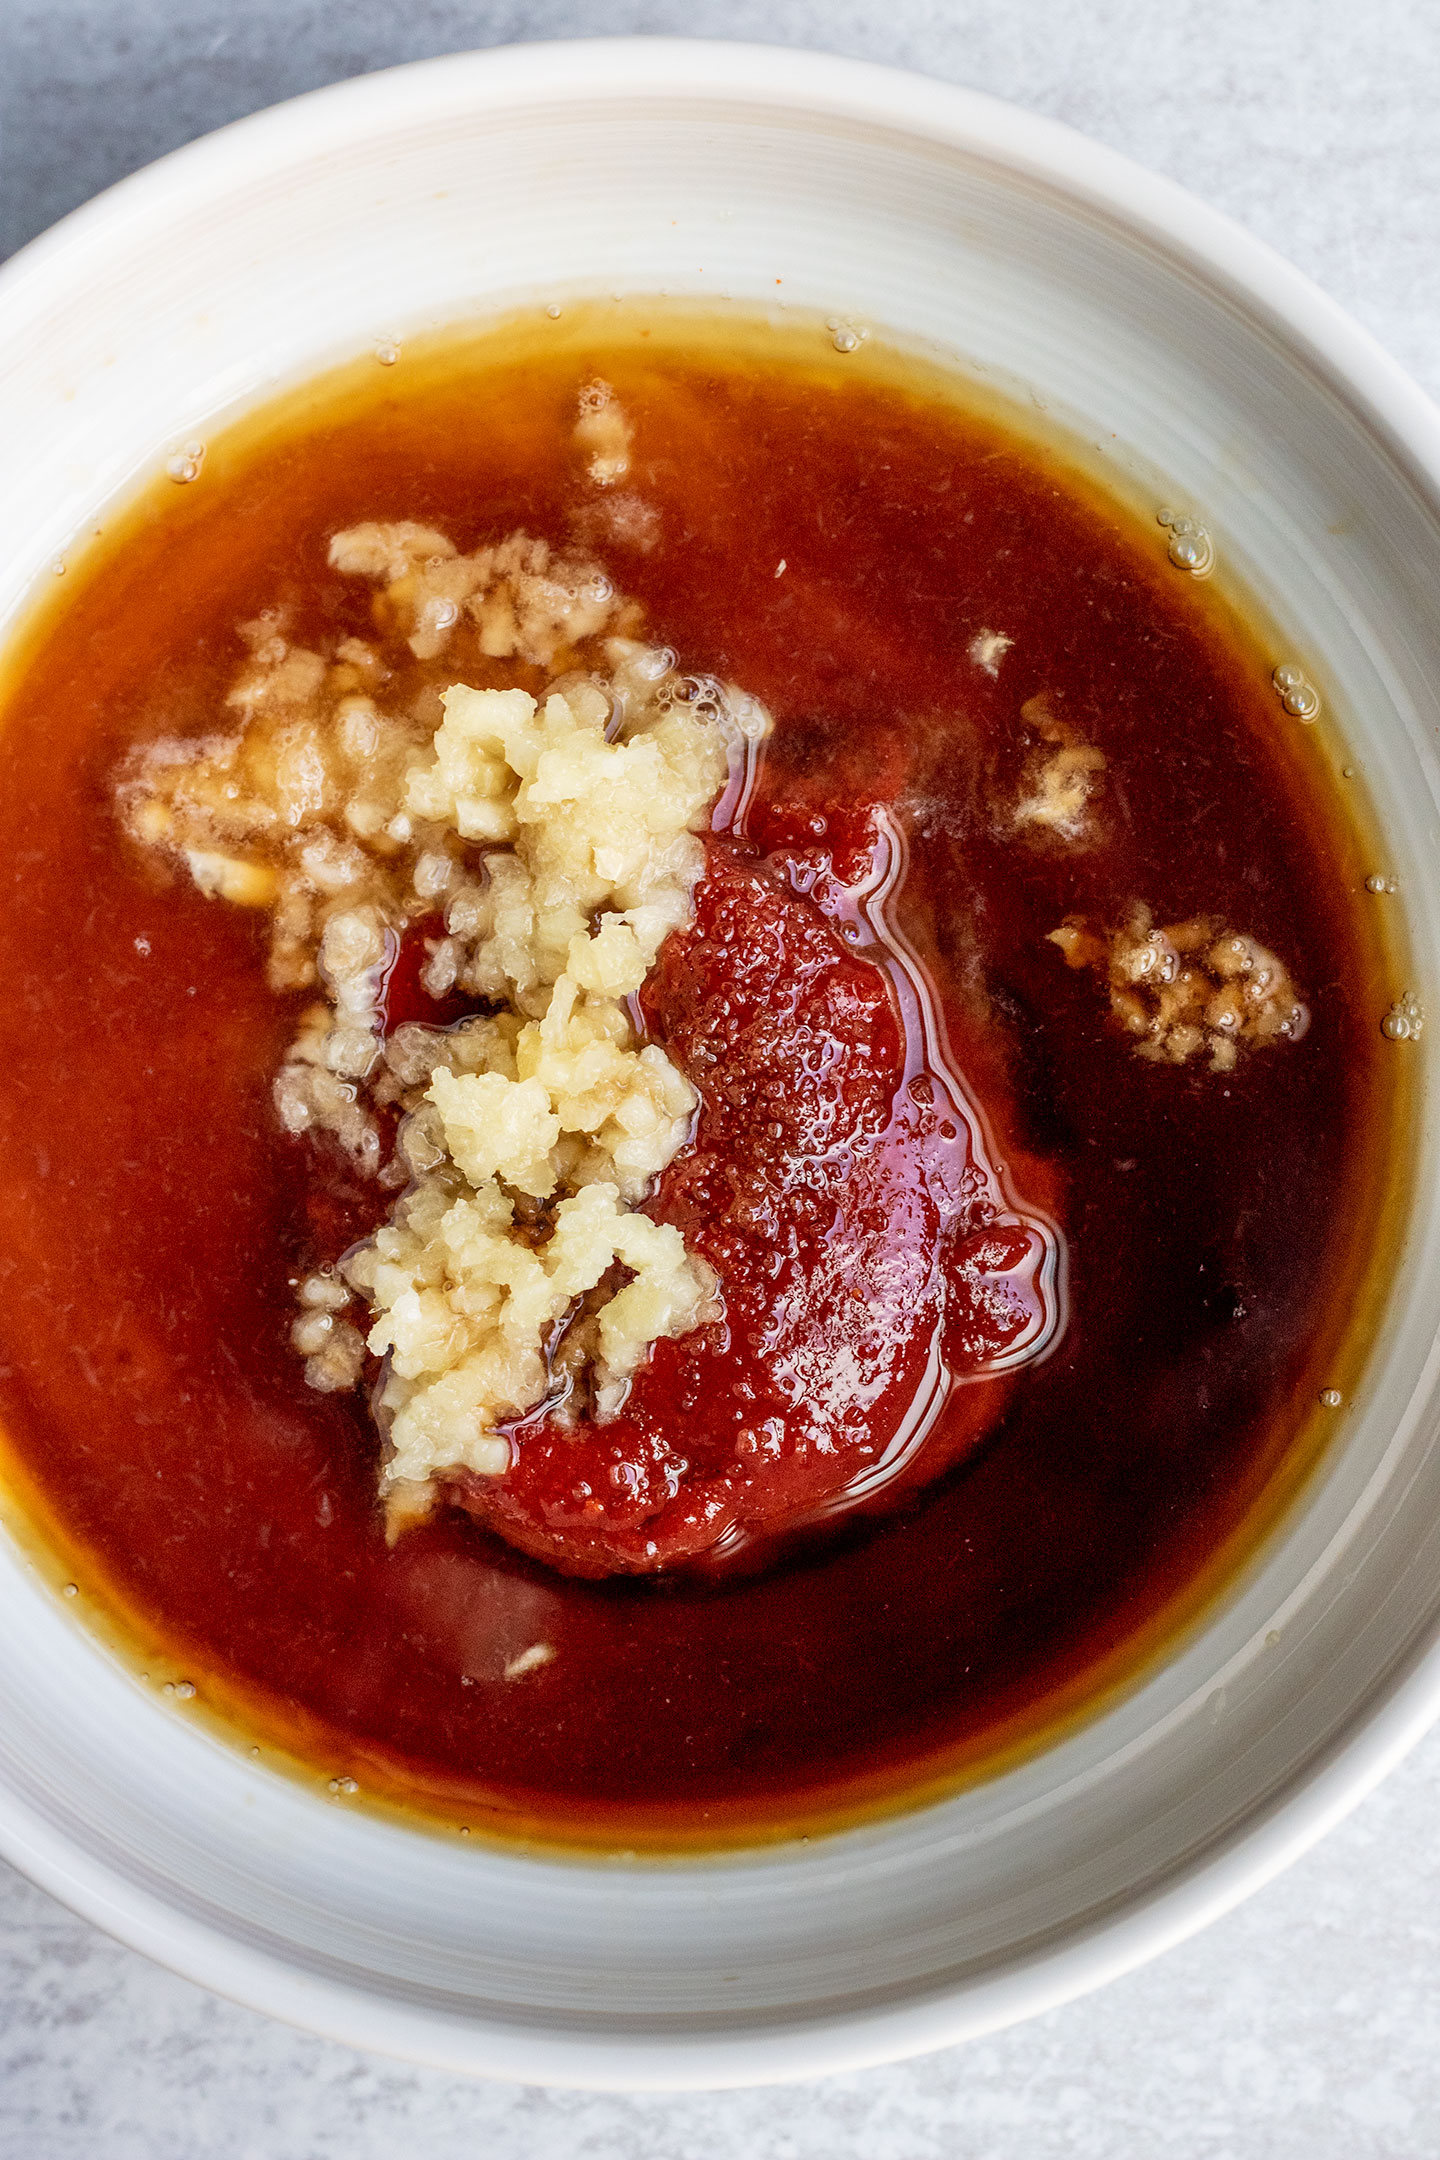 Placing the gochujang, soy sauce, garlic, sugar, maple syrup and rice vinegar together in a bowl to make a sauce.